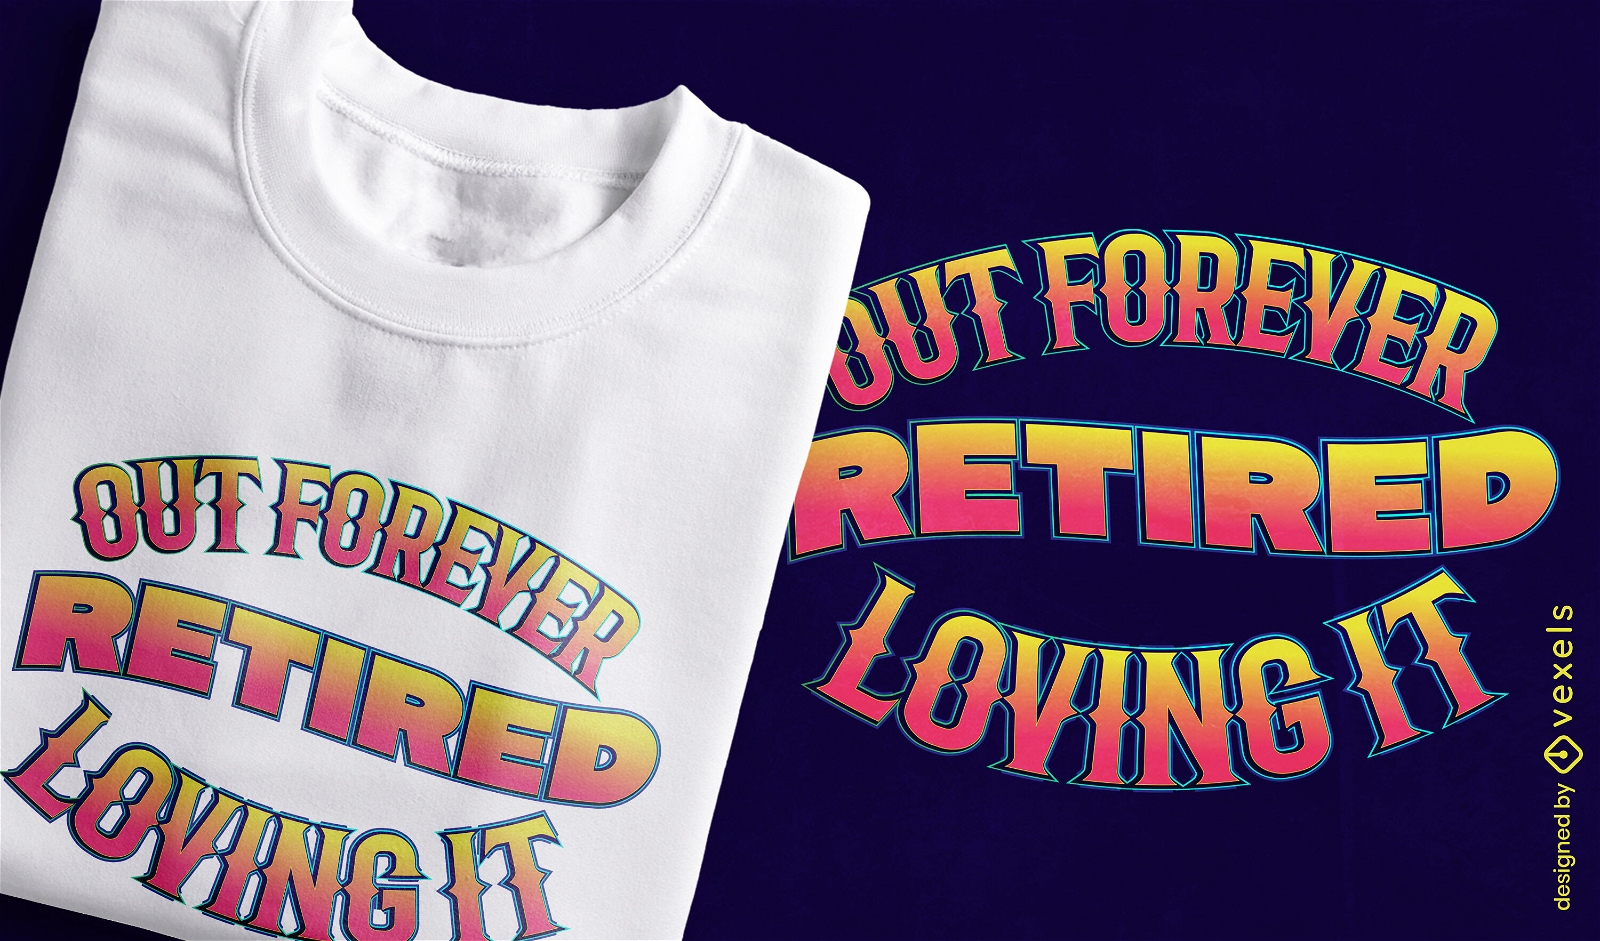 Retired forever quote t-shirt design